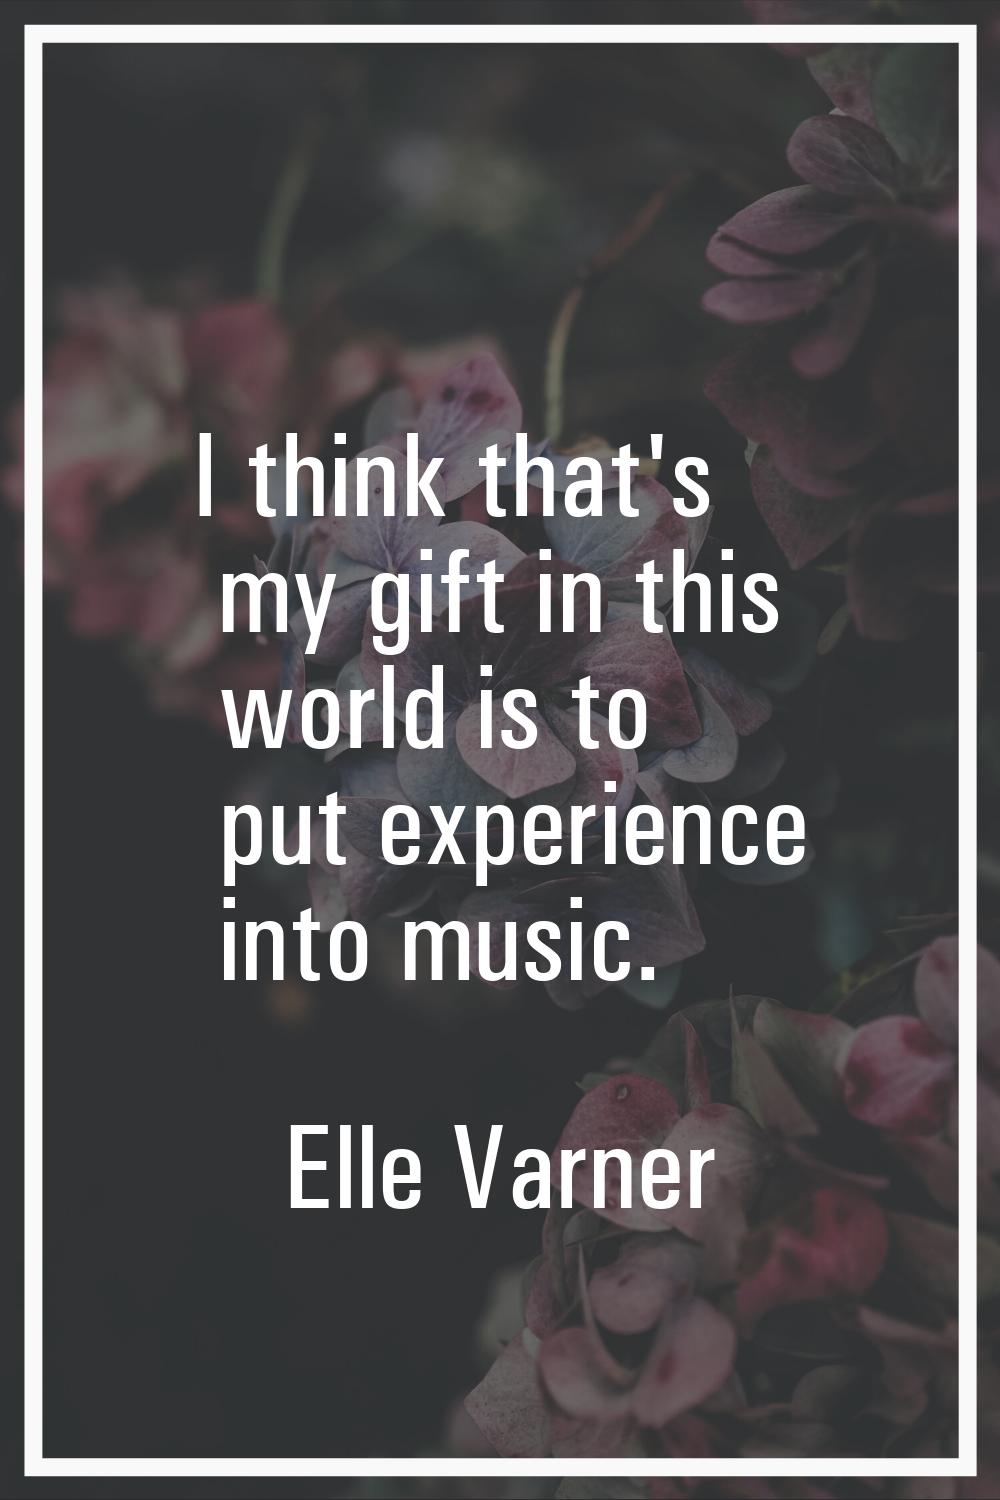 I think that's my gift in this world is to put experience into music.